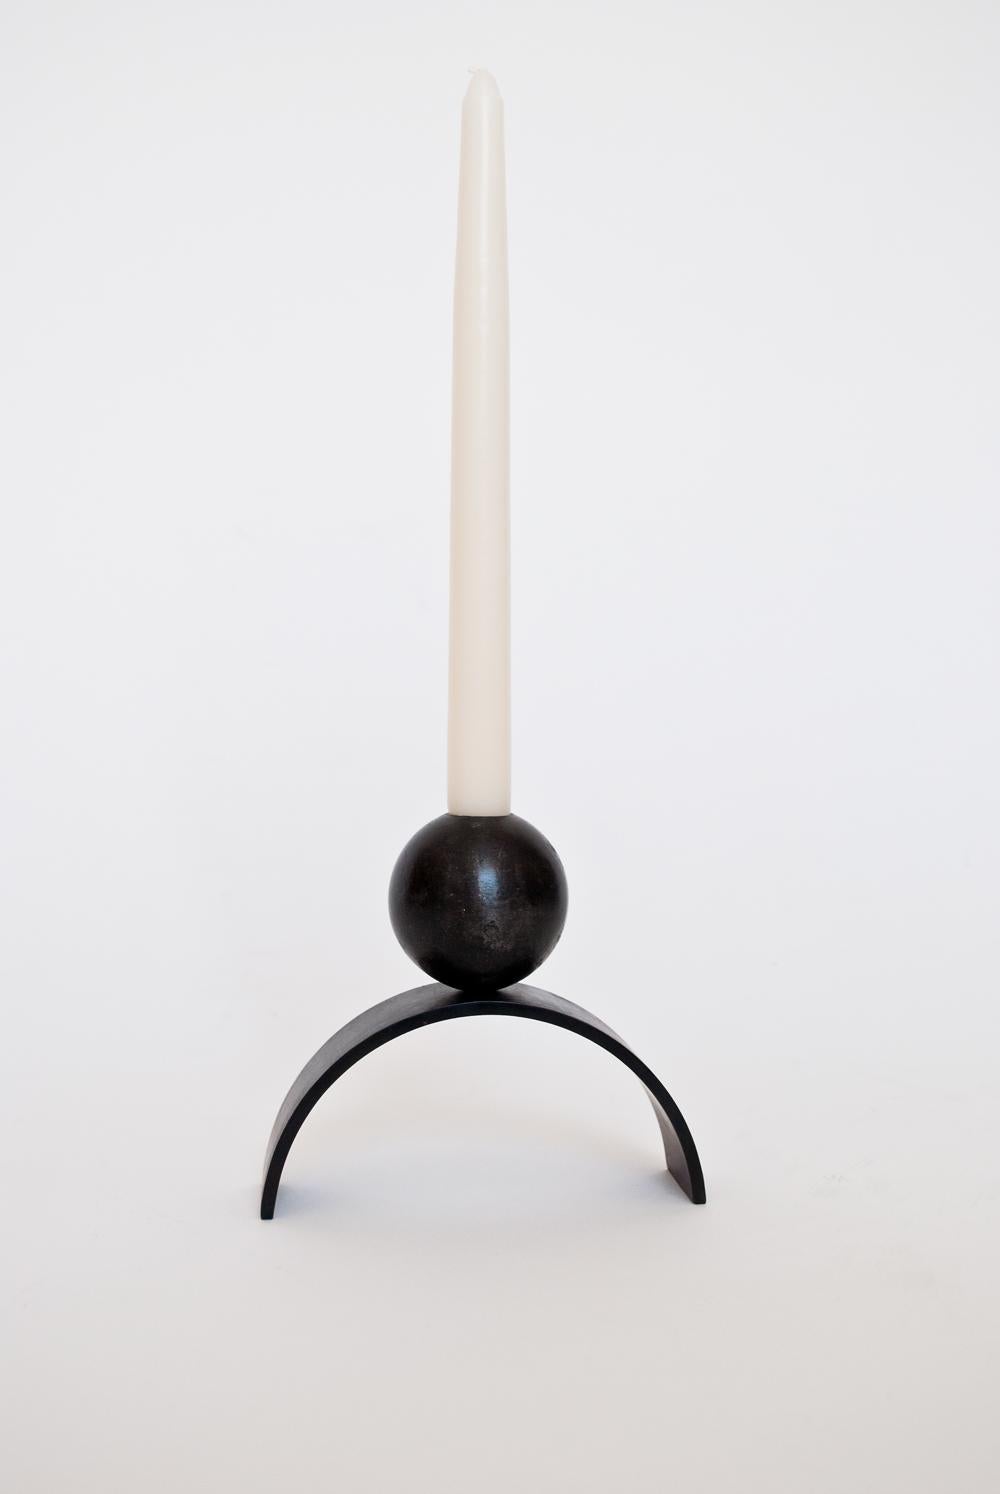 Louis Jobst' arch and ball candle holder. The candle holder is machined from solid steel and patinated black. The candle holder shows off a contemporary form of an arch with a ball / sphere elegantly balancing on top. The design is inspired from